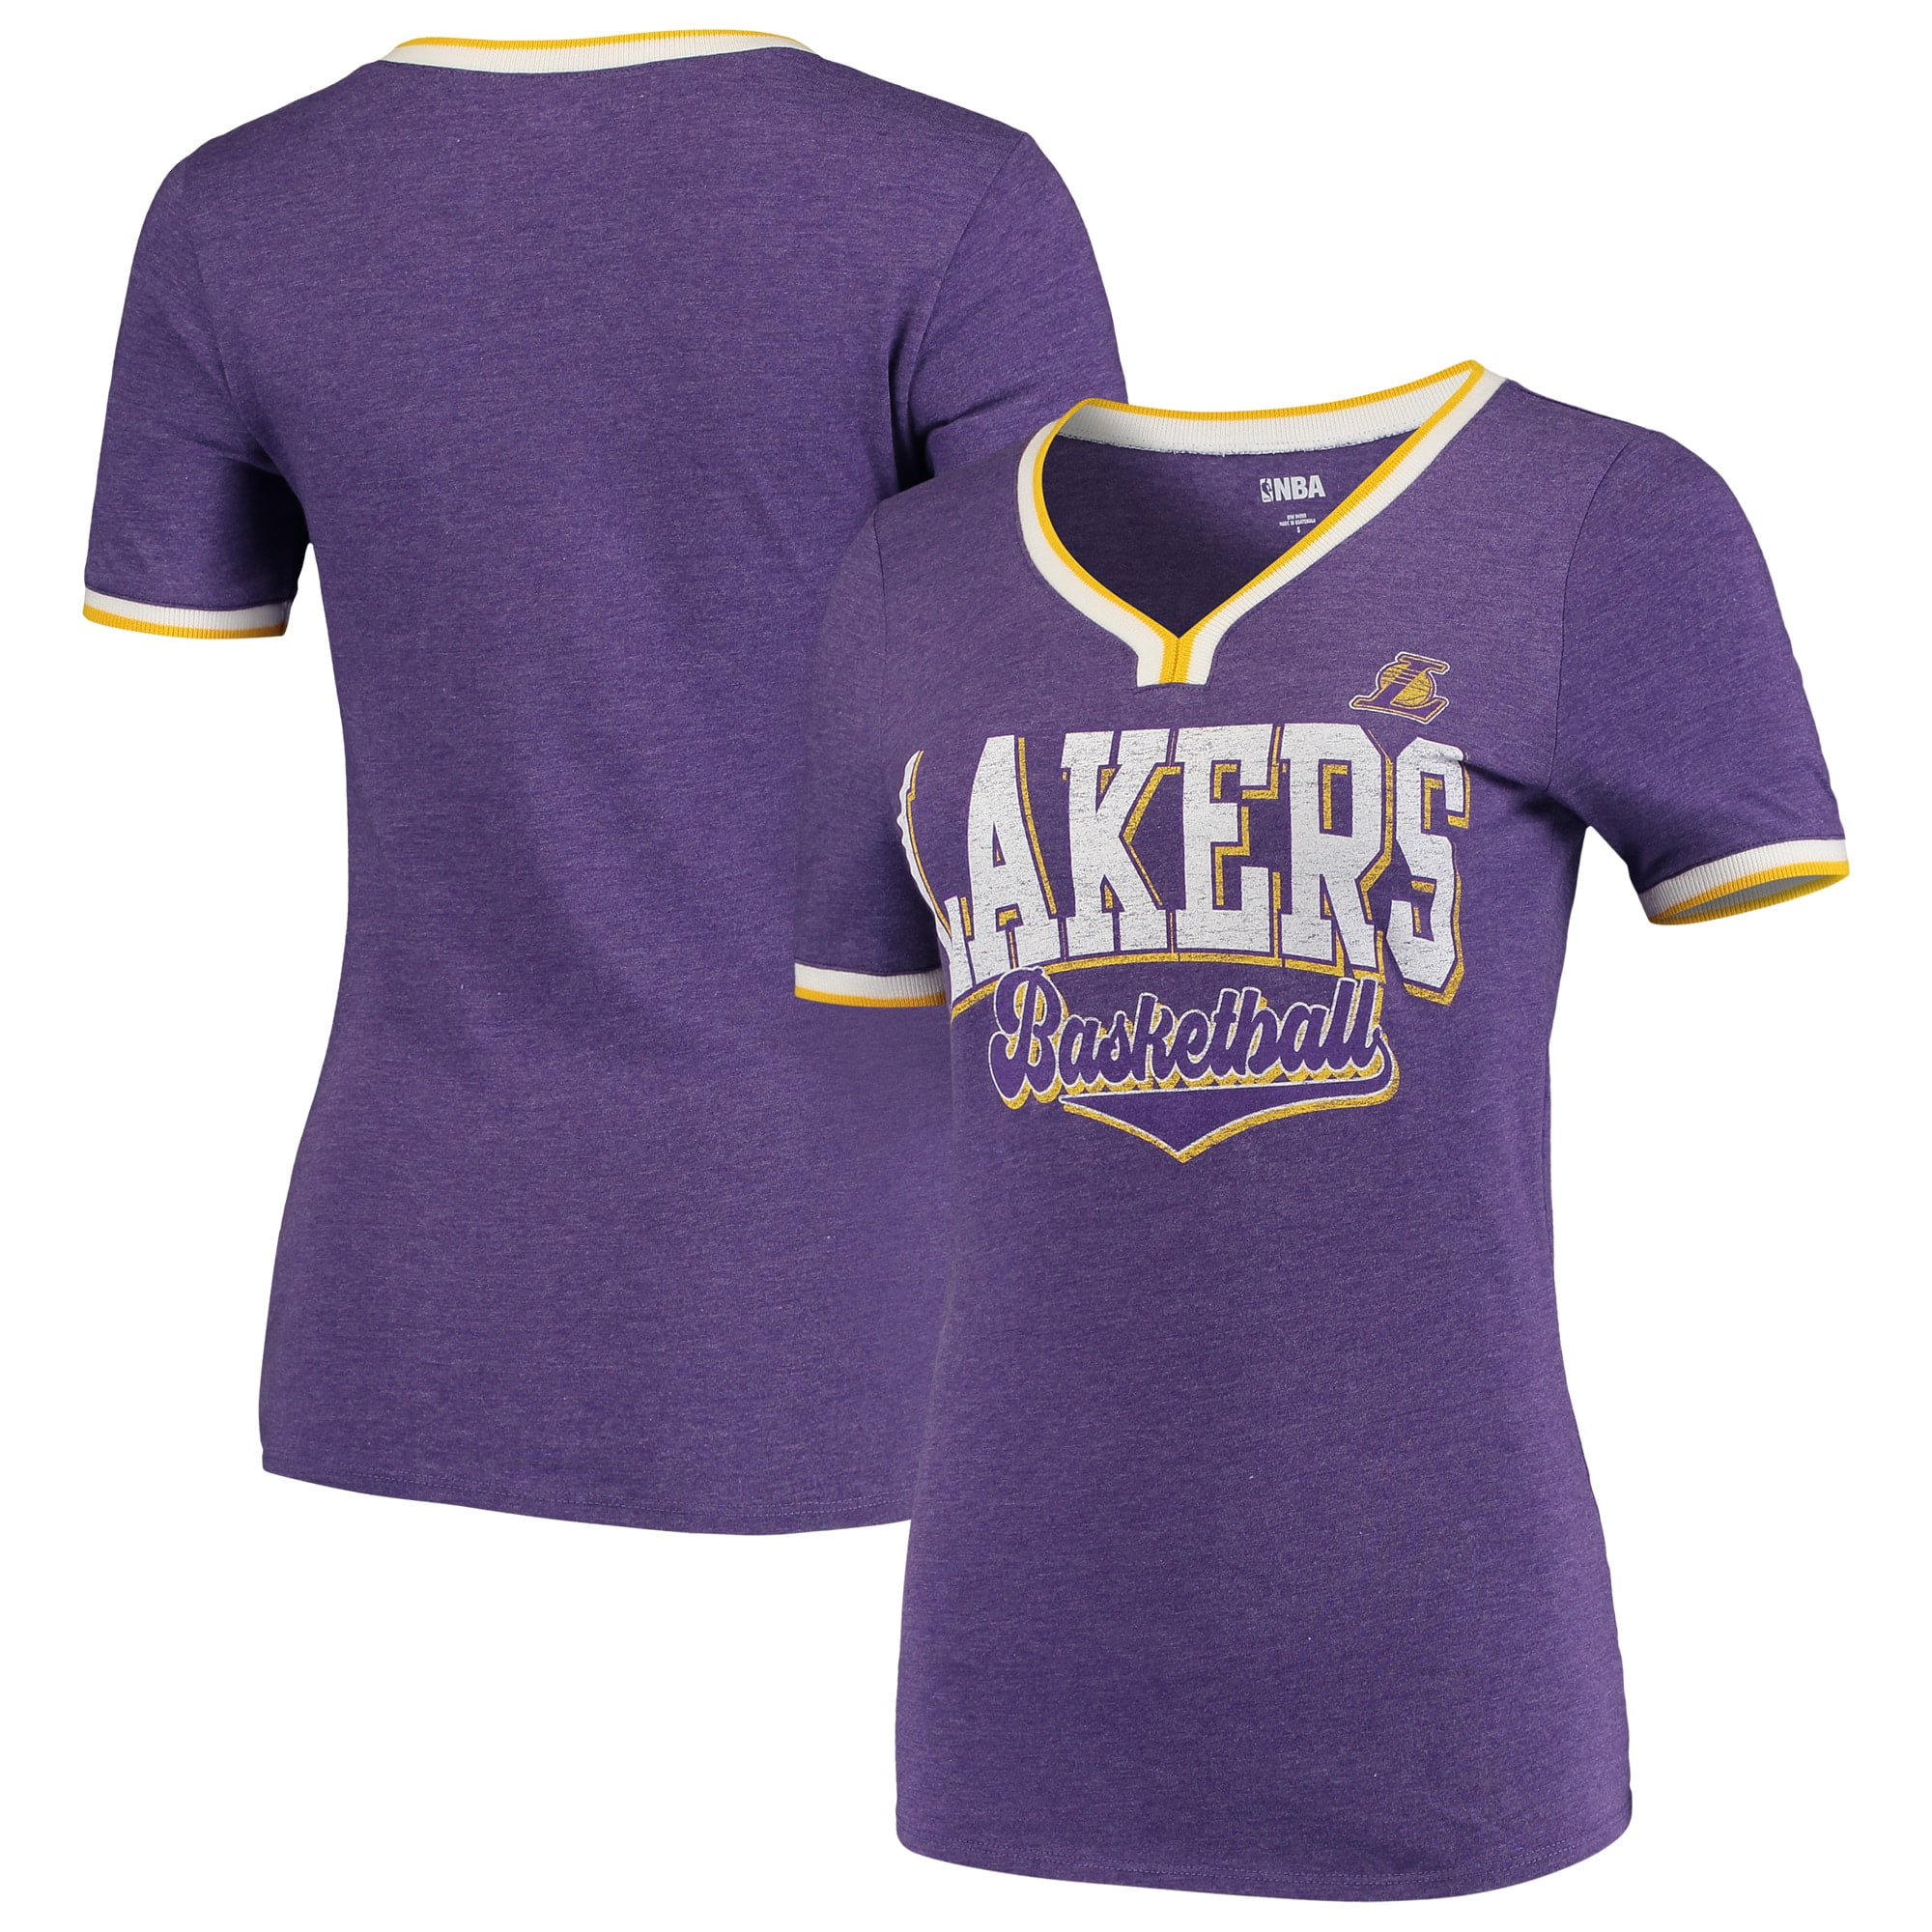 lakers female jersey